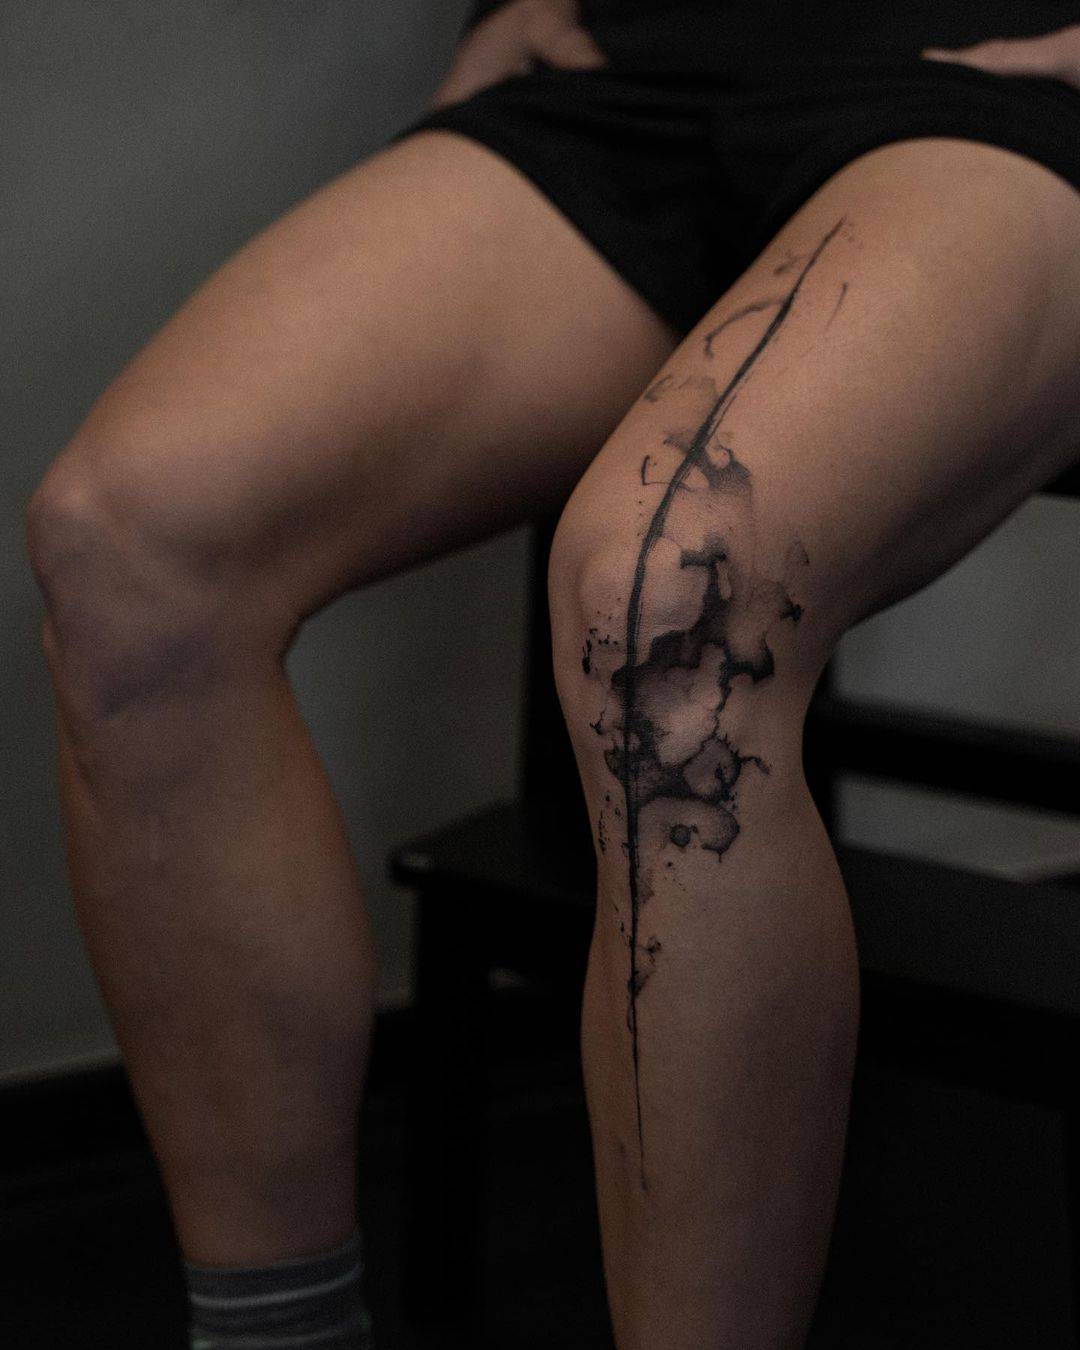 Beautiful abstract tattoo on knee by e.tedebring